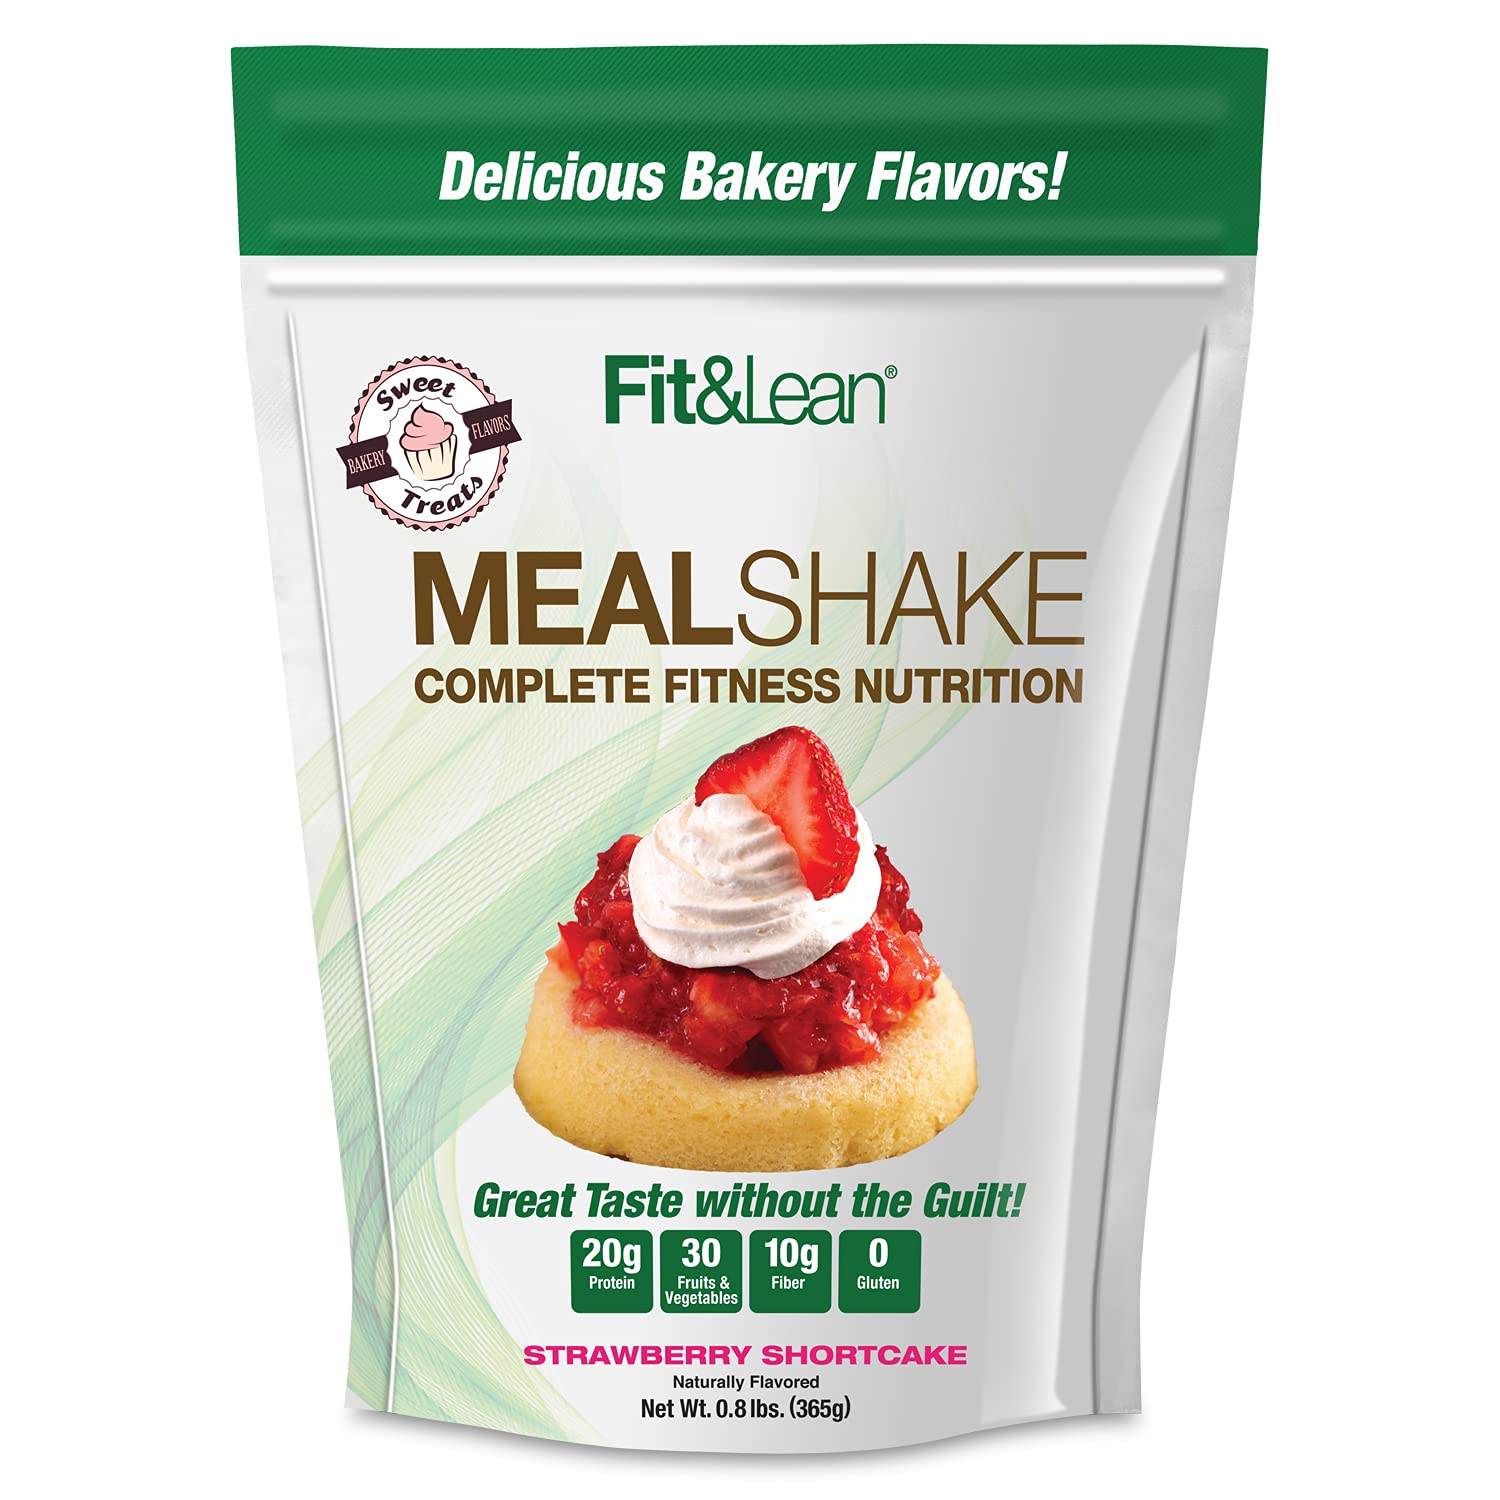 Fit & Lean Meal Shake, Fat Burning Meal Replacement, Protein, Fiber, P